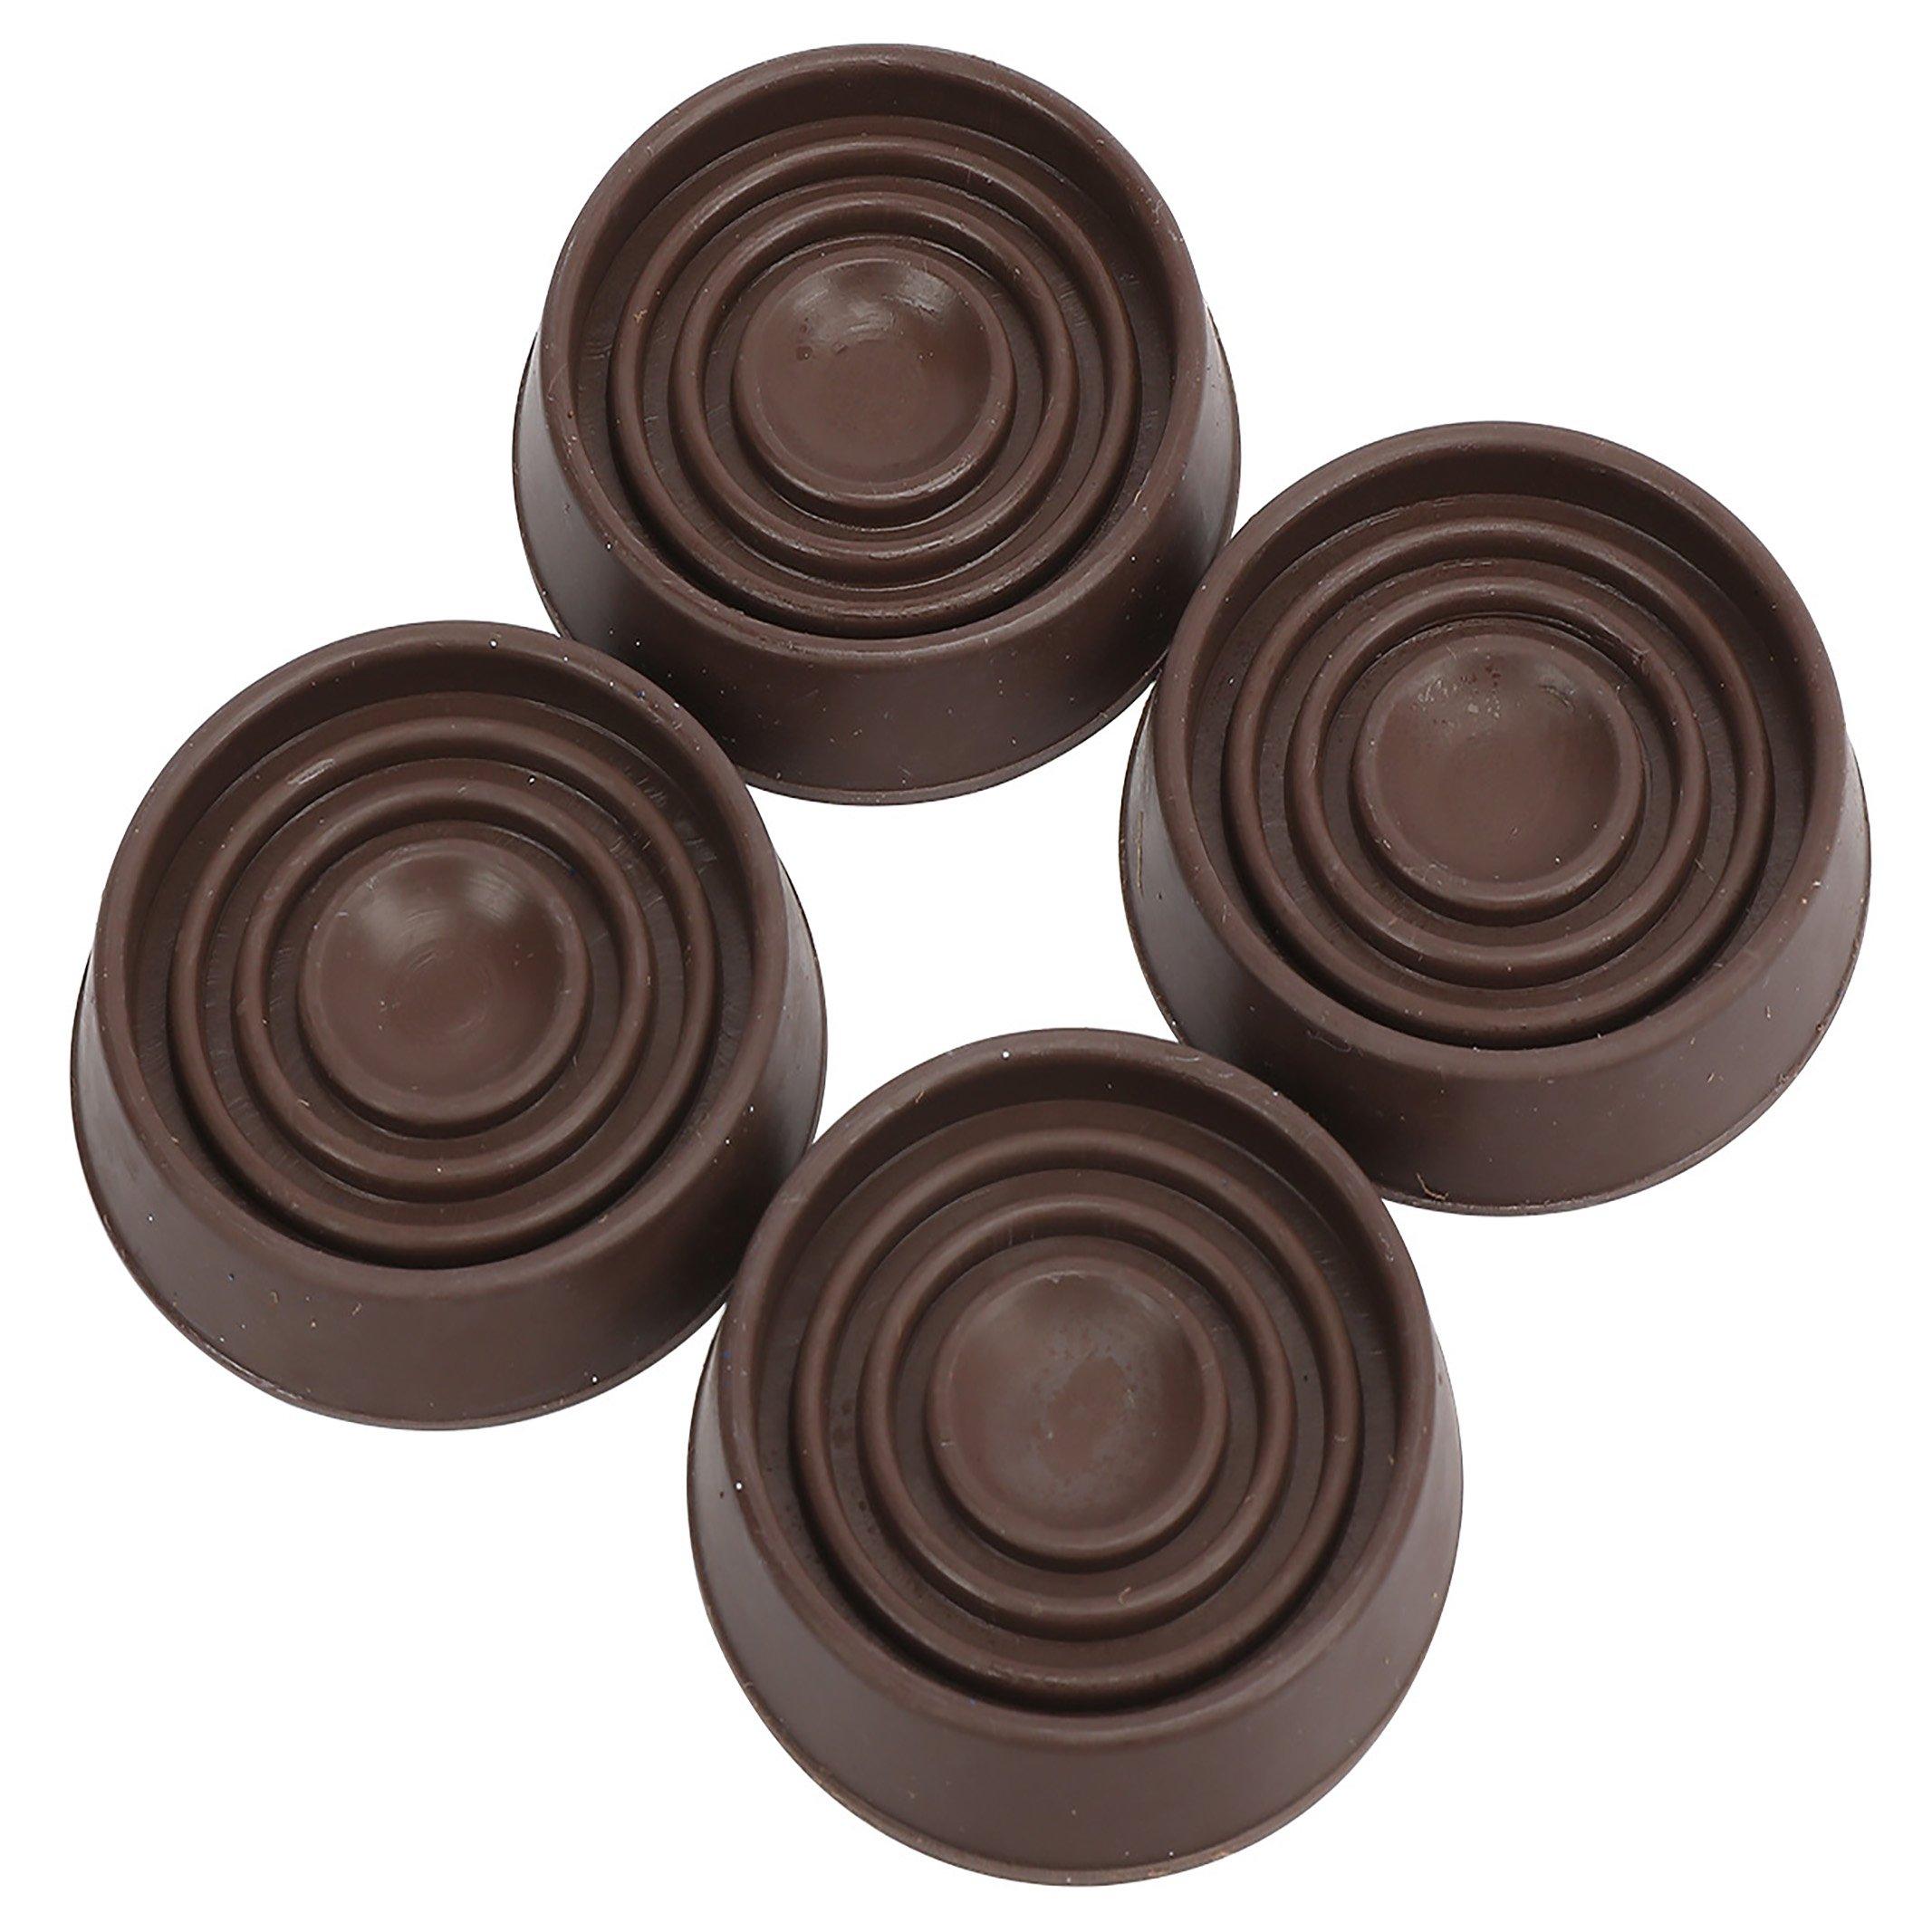 Work Pro 1-3/4in. Small Round Furniture Caps - 4pk.